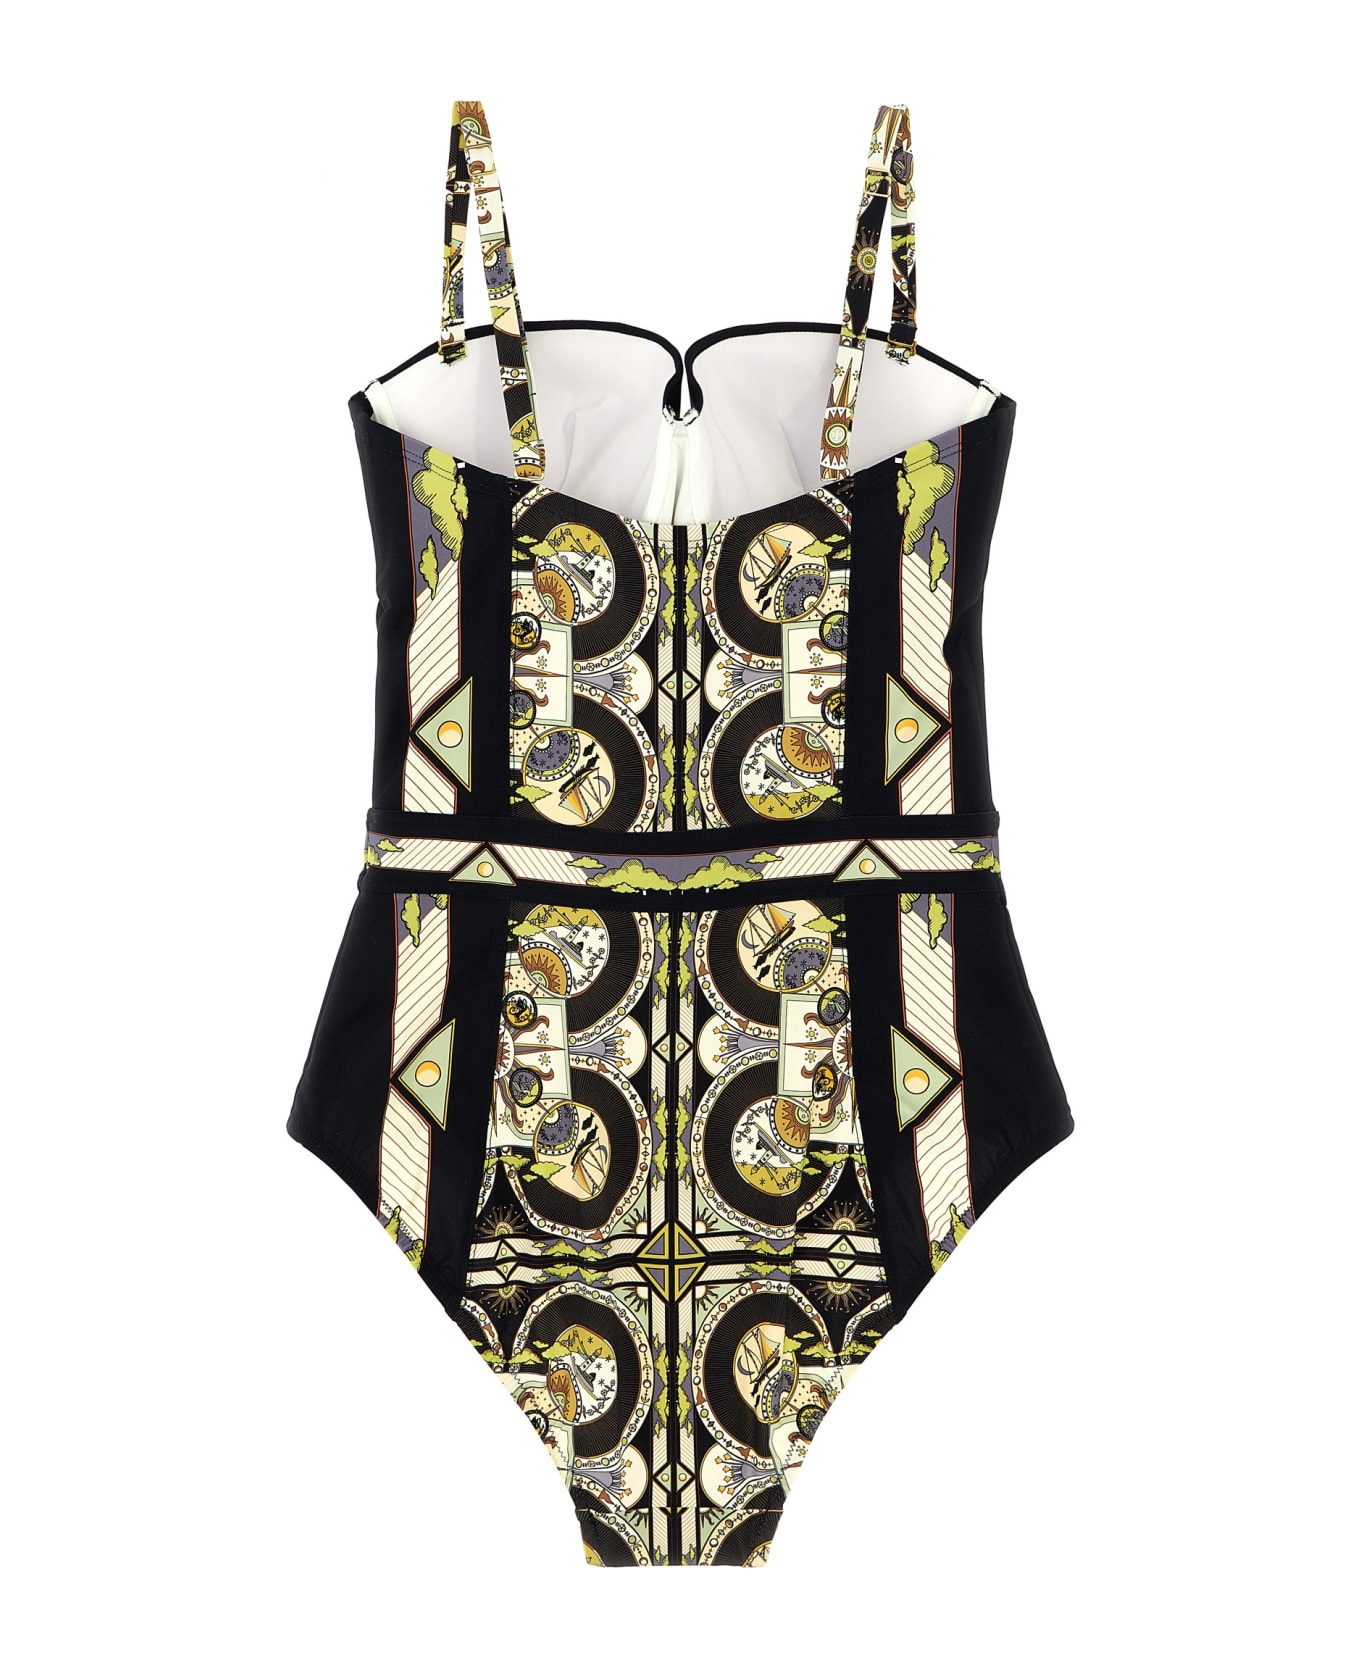 Tory Burch One-piece Swimsuit With All-over Print - Multicolor